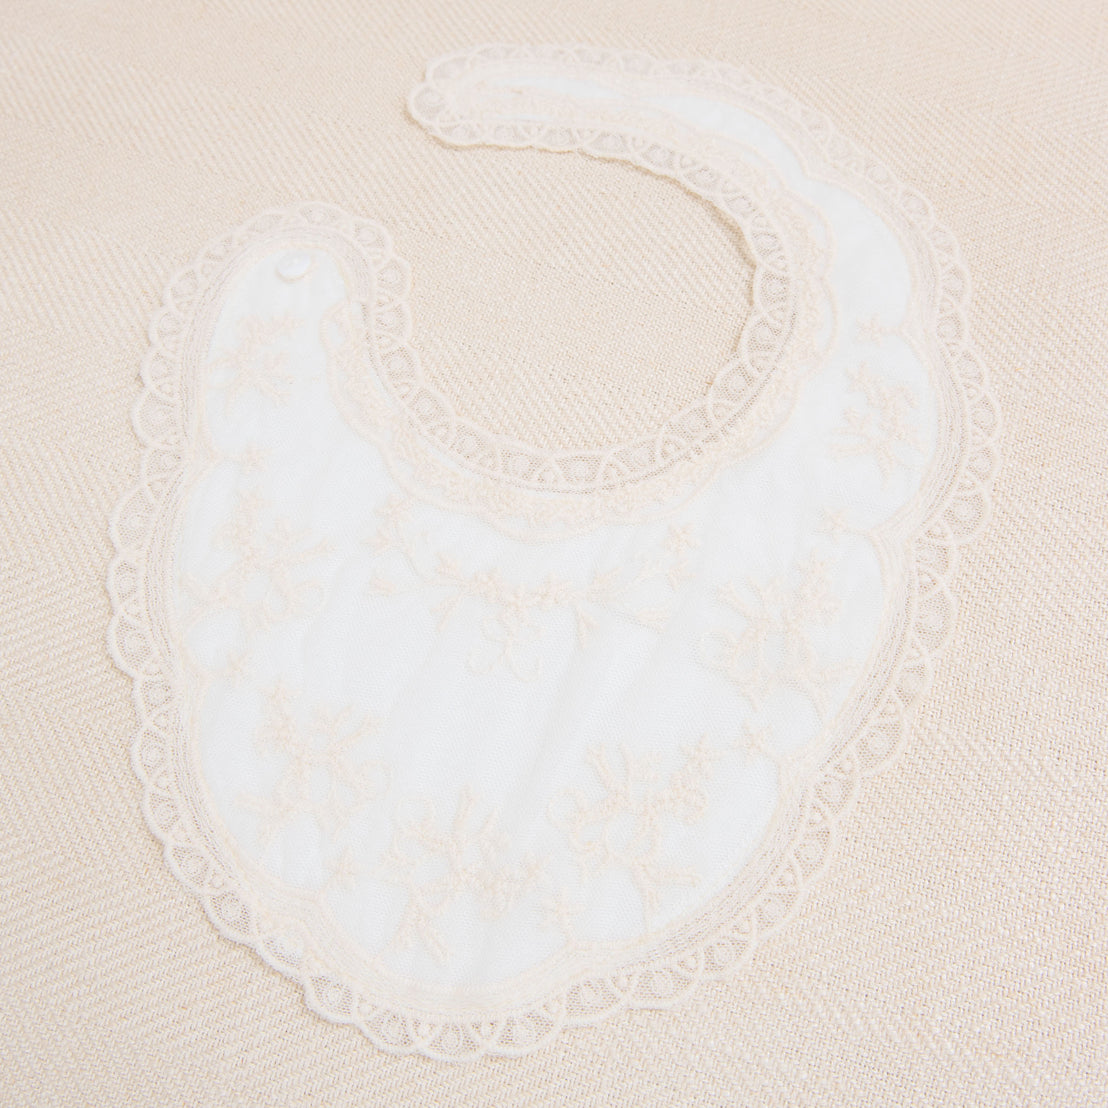 The Jessica Cotton Bib, featuring an intricate floral embroidery champagne lace over ivory cotton, displayed on a beige fabric background.